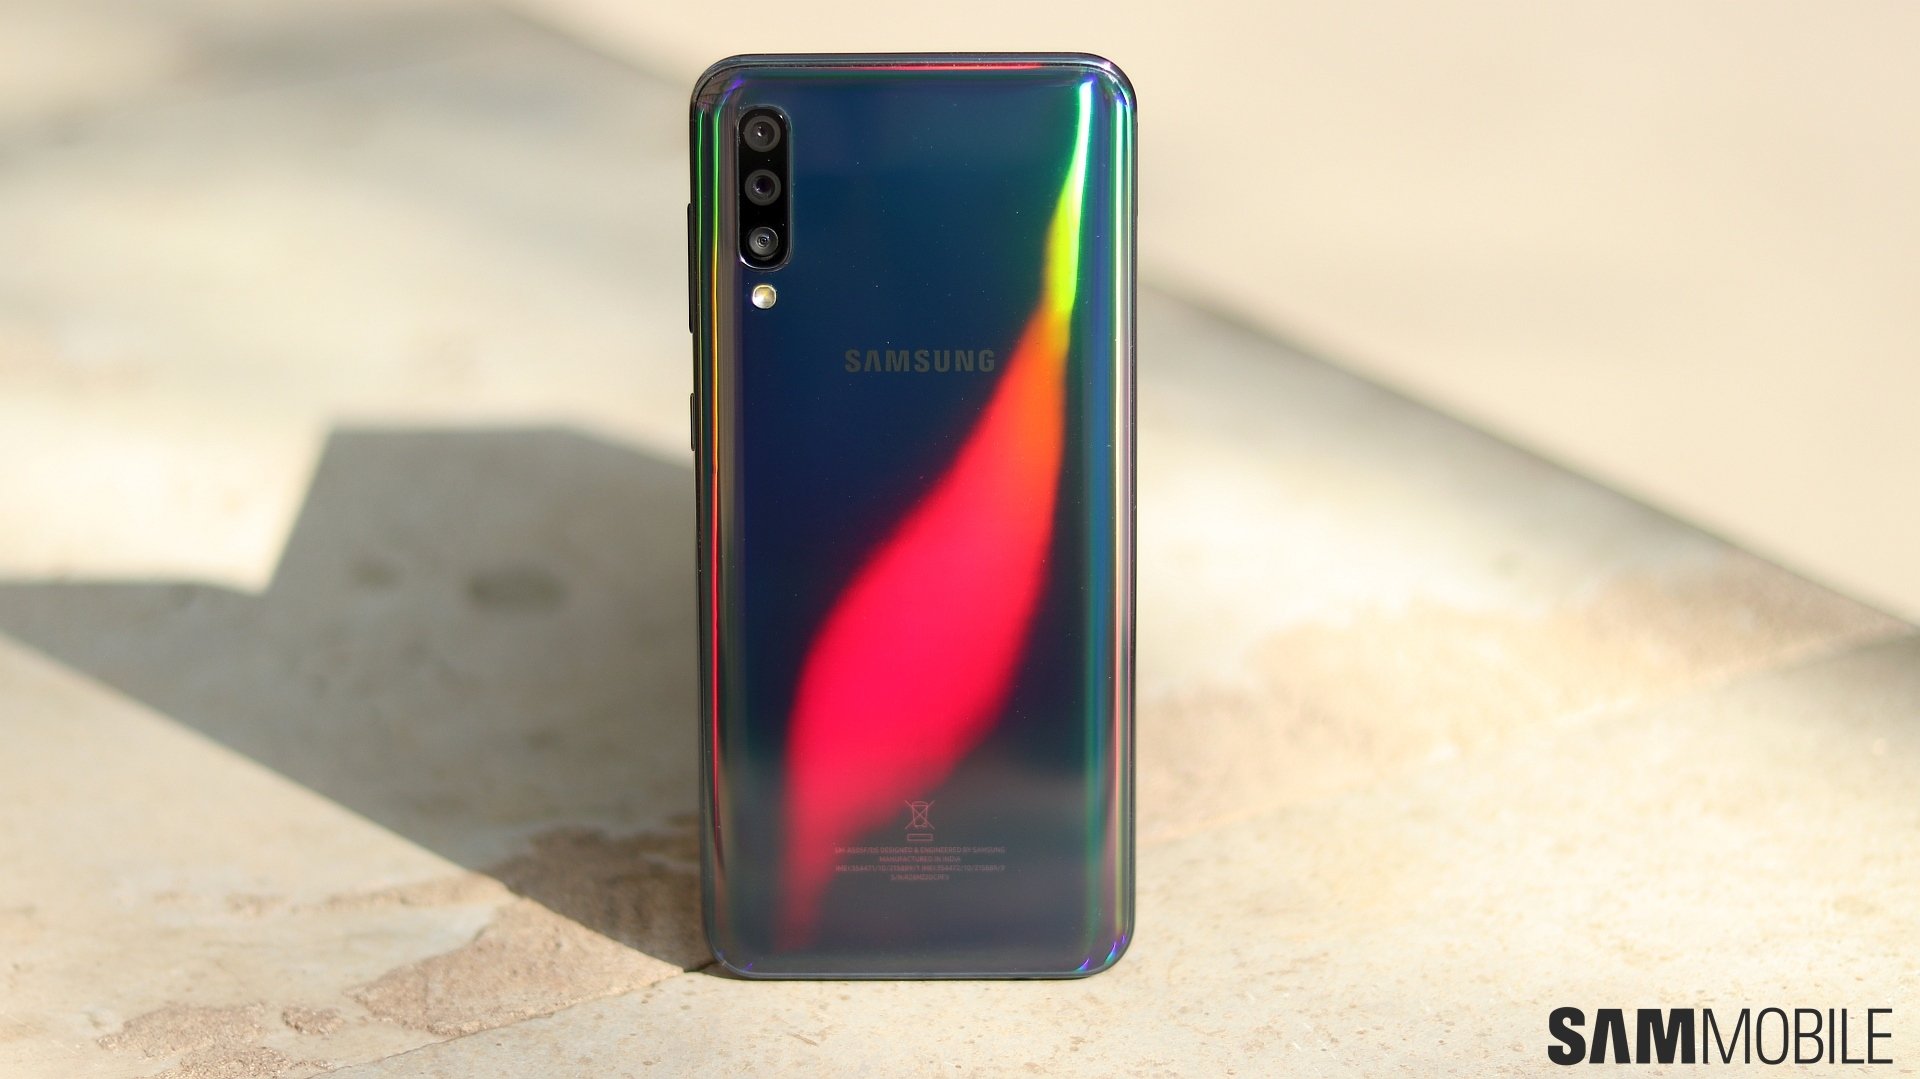 Galaxy A50 review: Samsung's mid-ranger yet - SamMobile